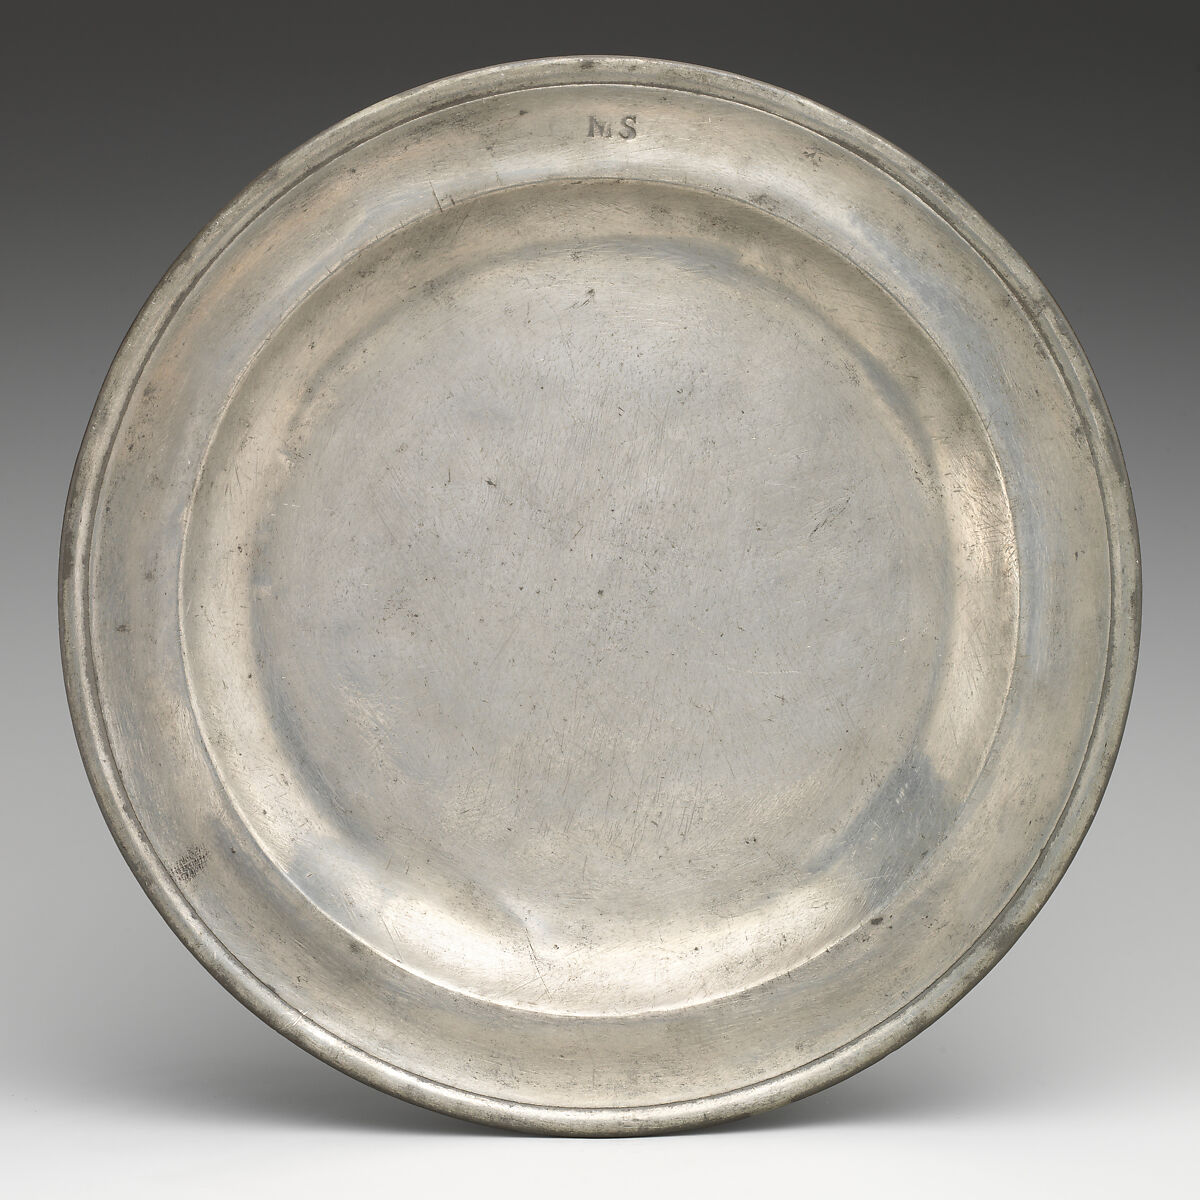 Plate, George Grenfell (or Greenfell) (British, active 1757, died 1784), Pewter, British, London 